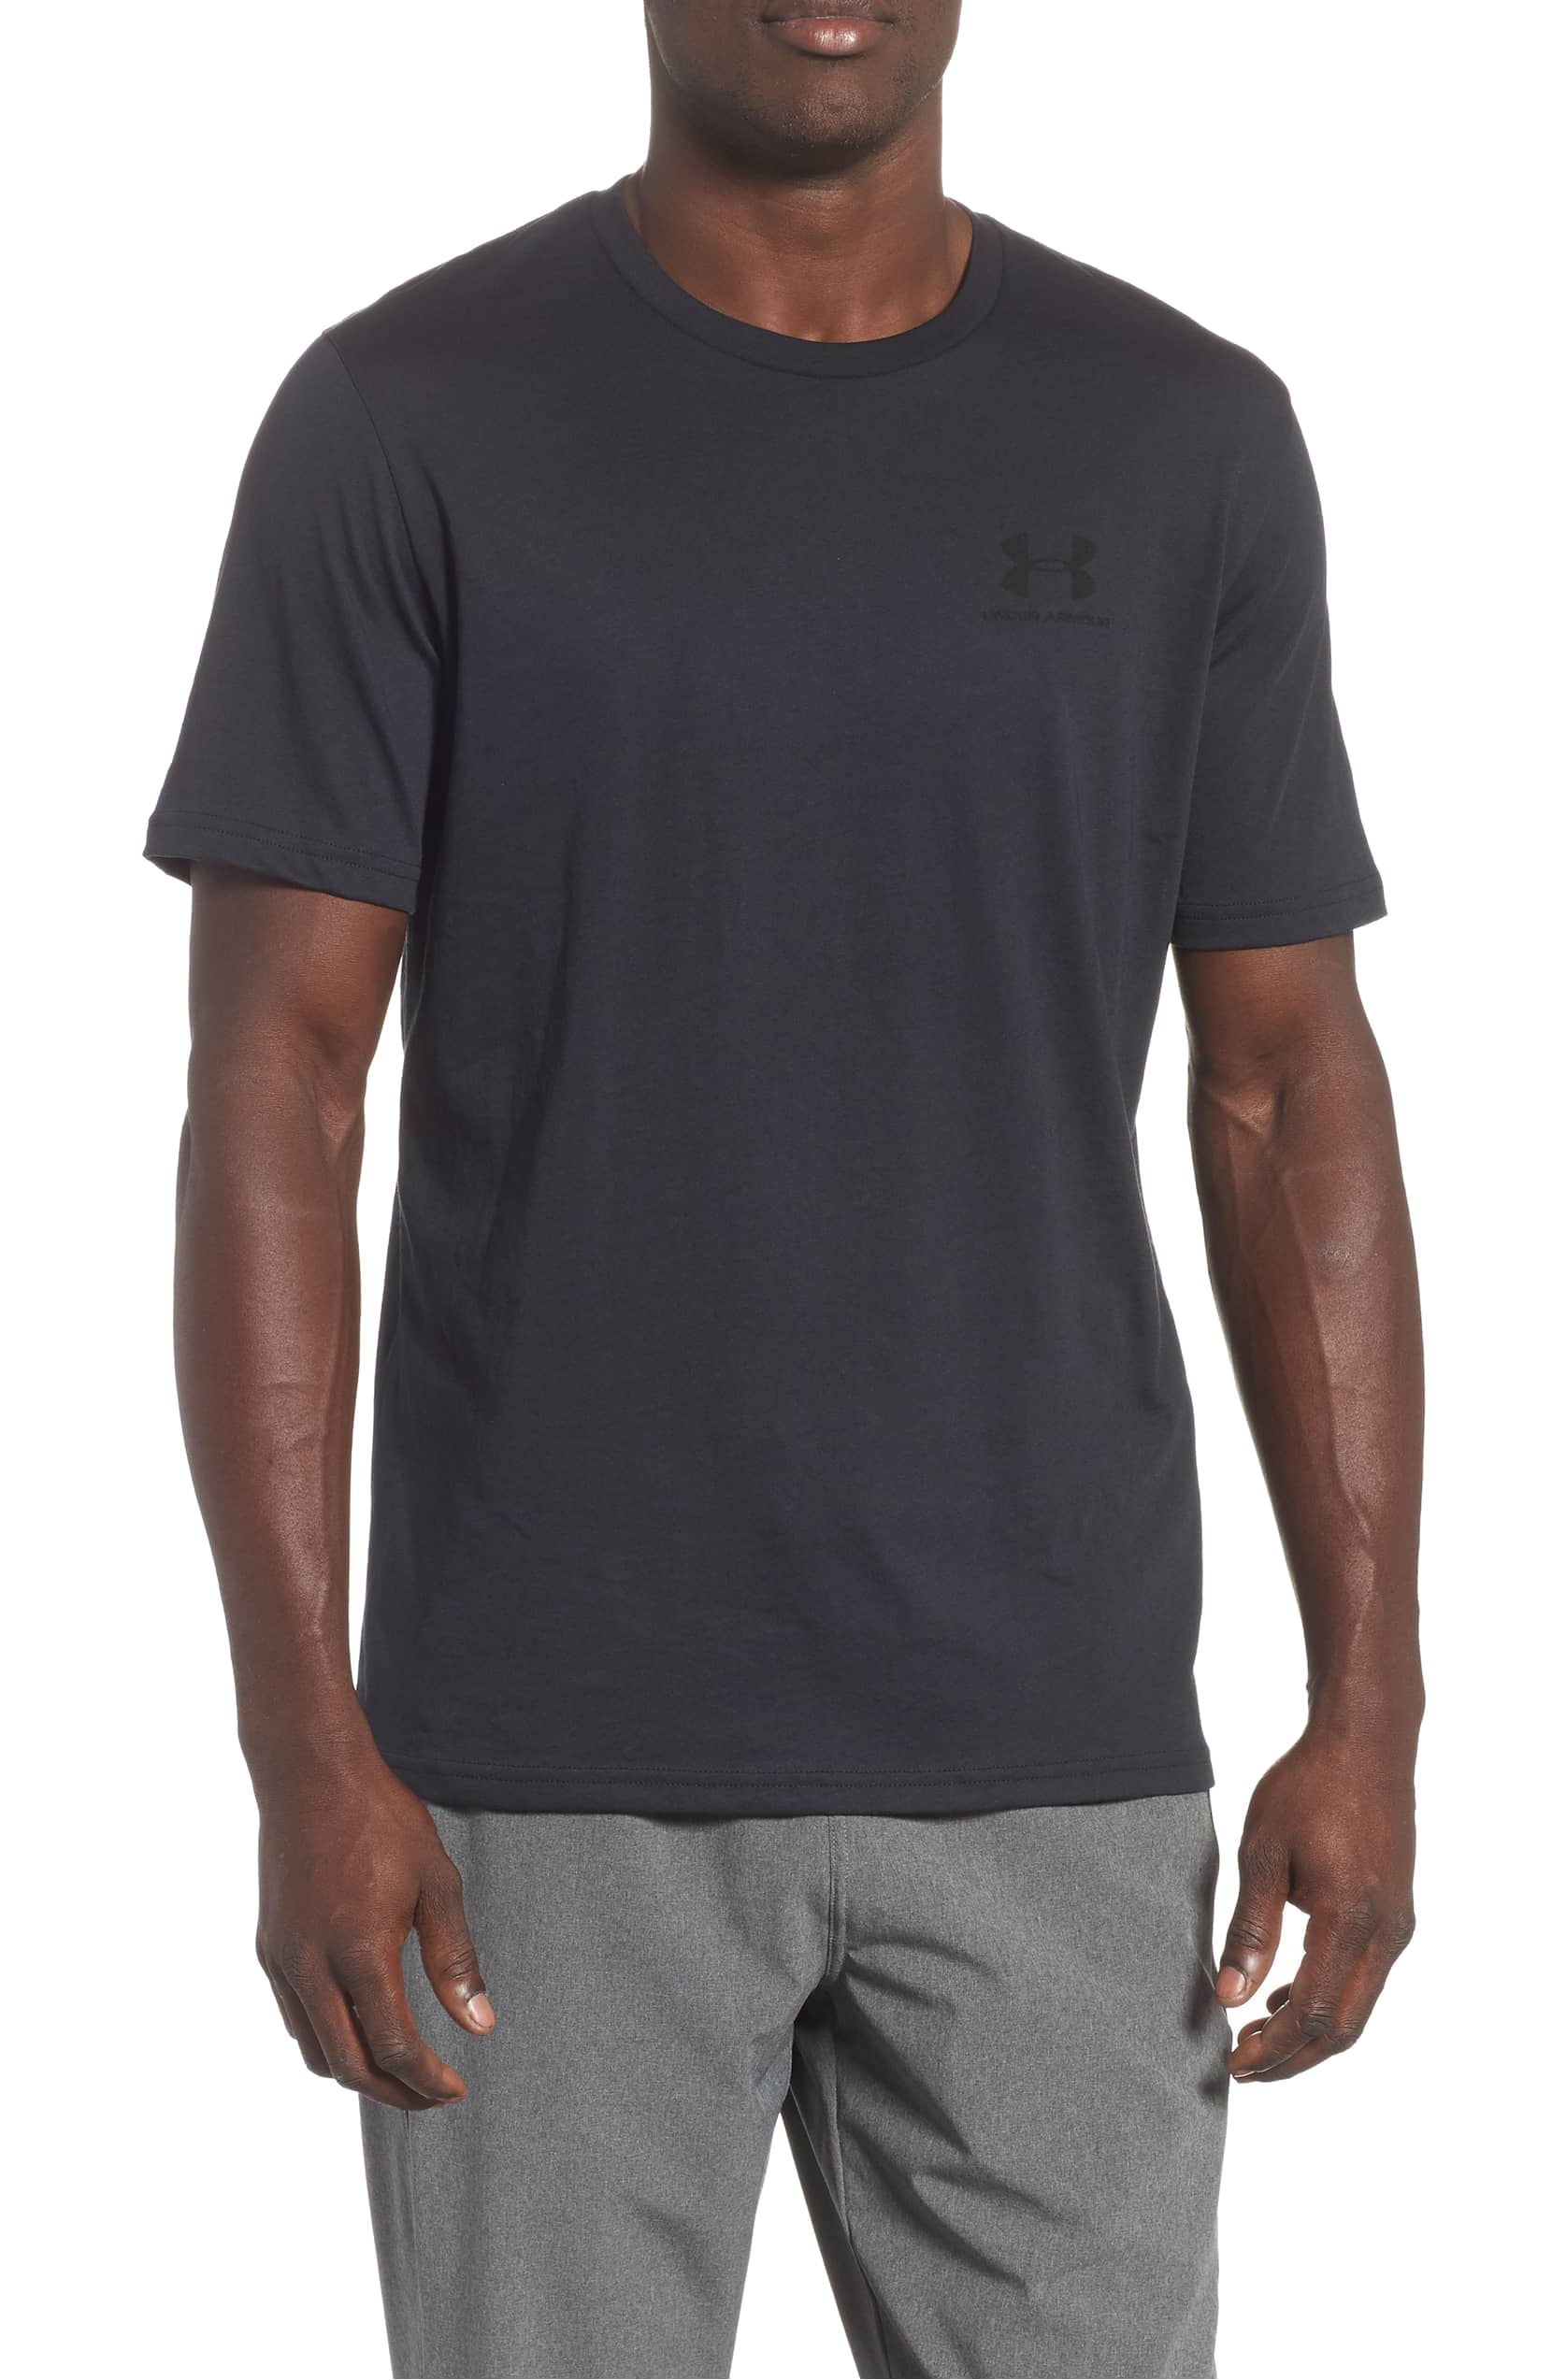 Under Armour - Under Armour Solid Mens Crewneck Loose Fit Tee Shirt ...